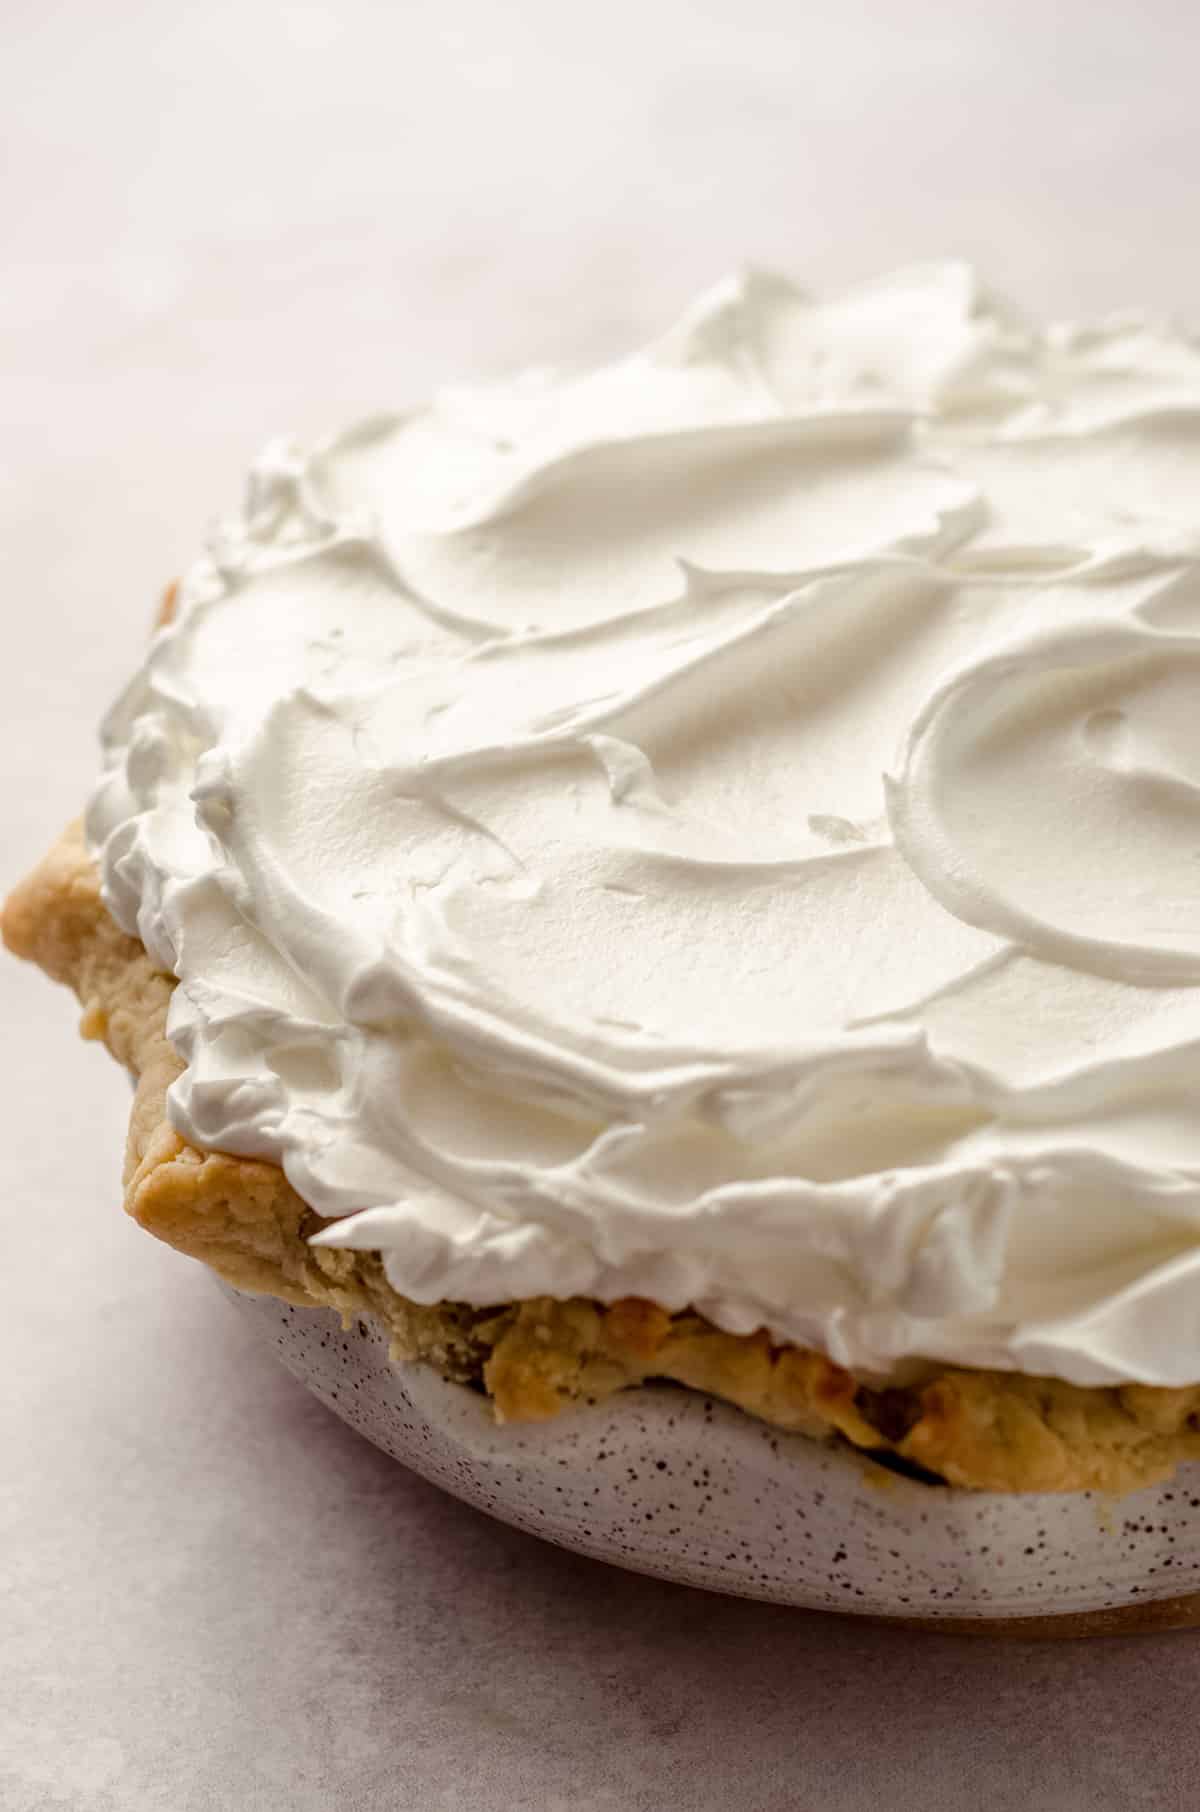 A pie topped with meringue.